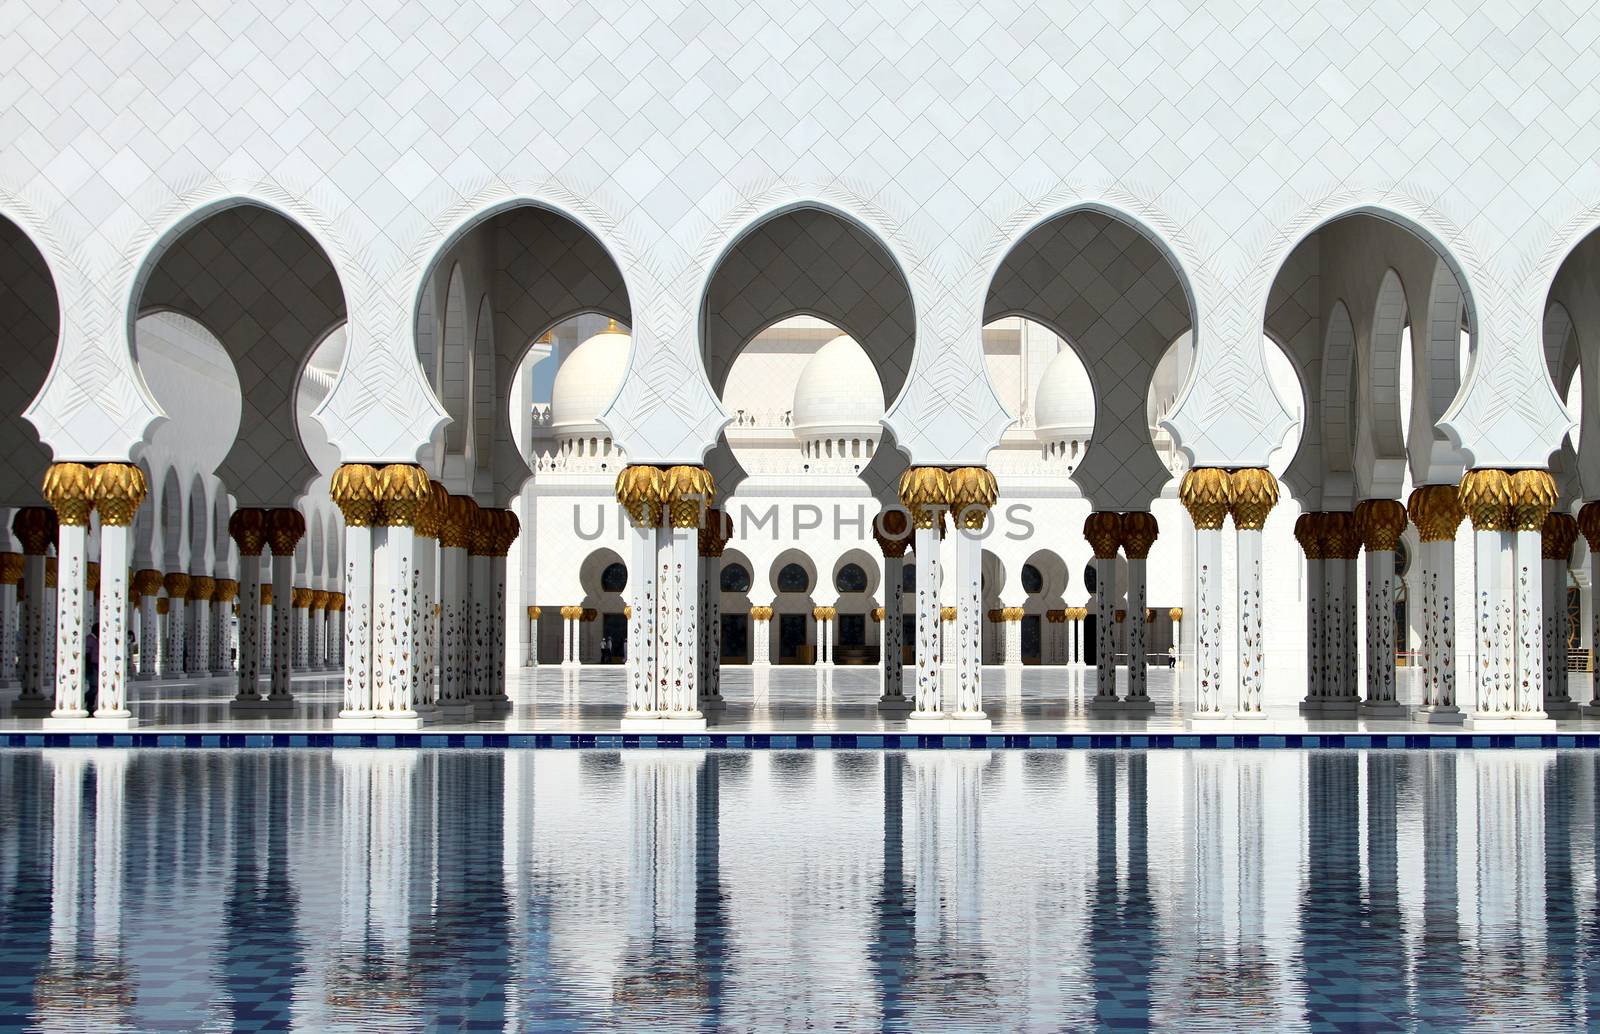 A side view of the Sheikh Zayed Grand Mosque.